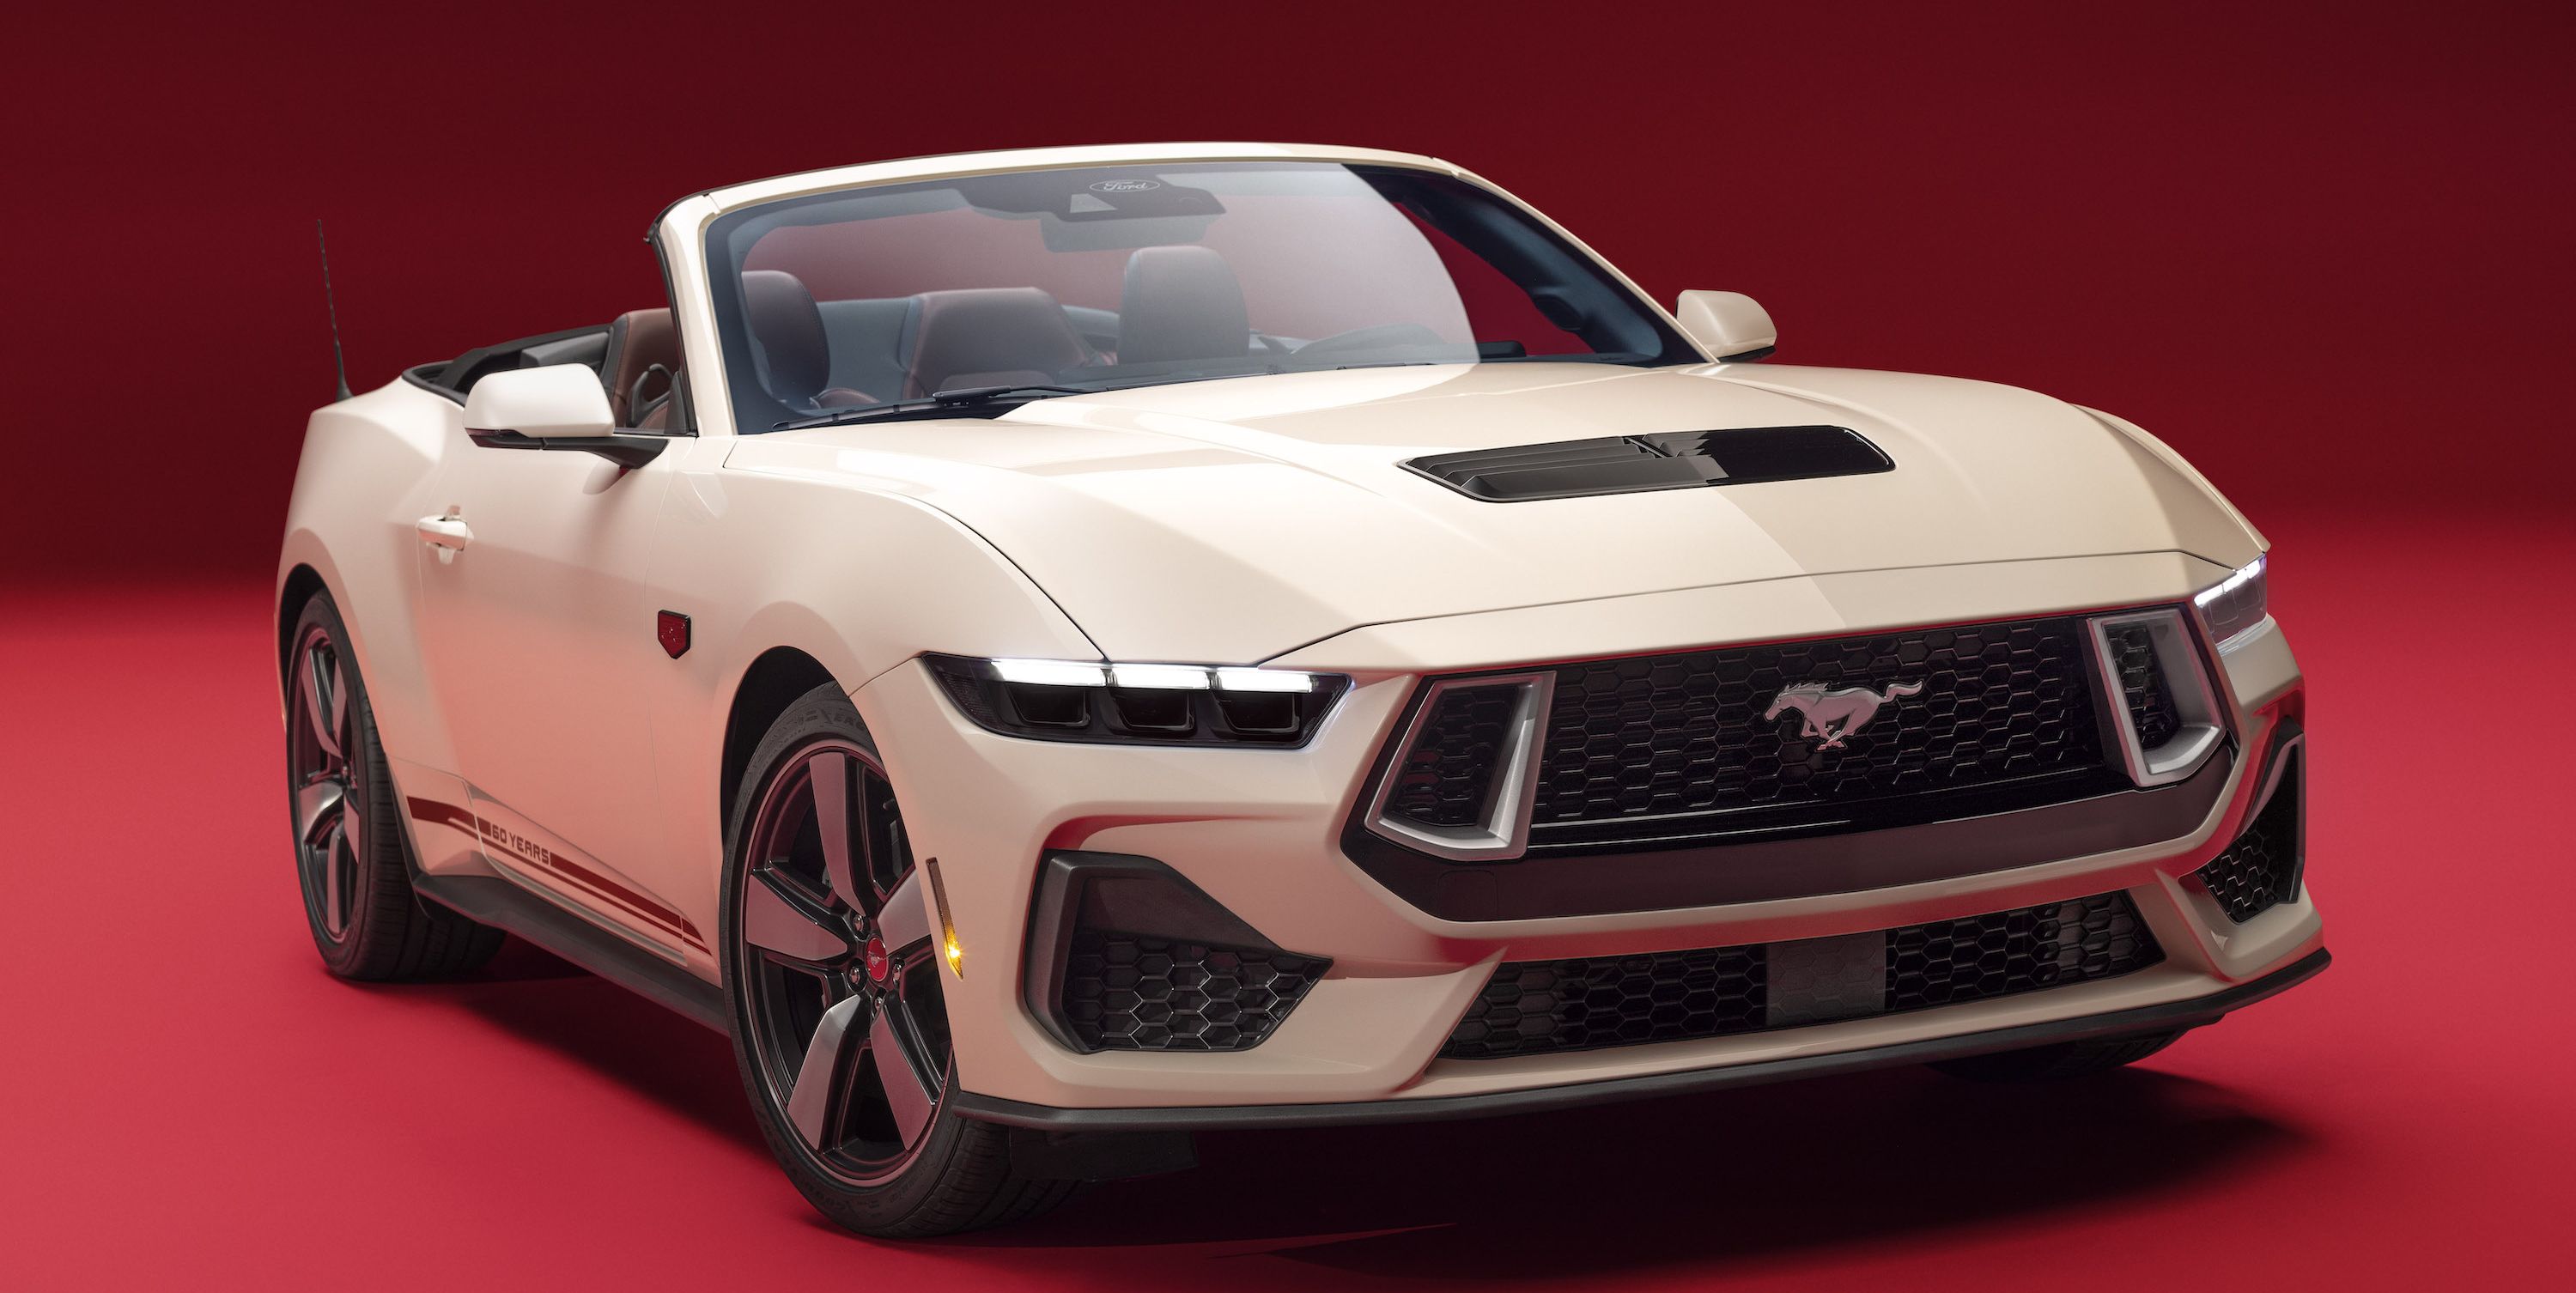 The S650 Mustang Goes Retro to Celebrate 60 Years of Pony Car Dominance